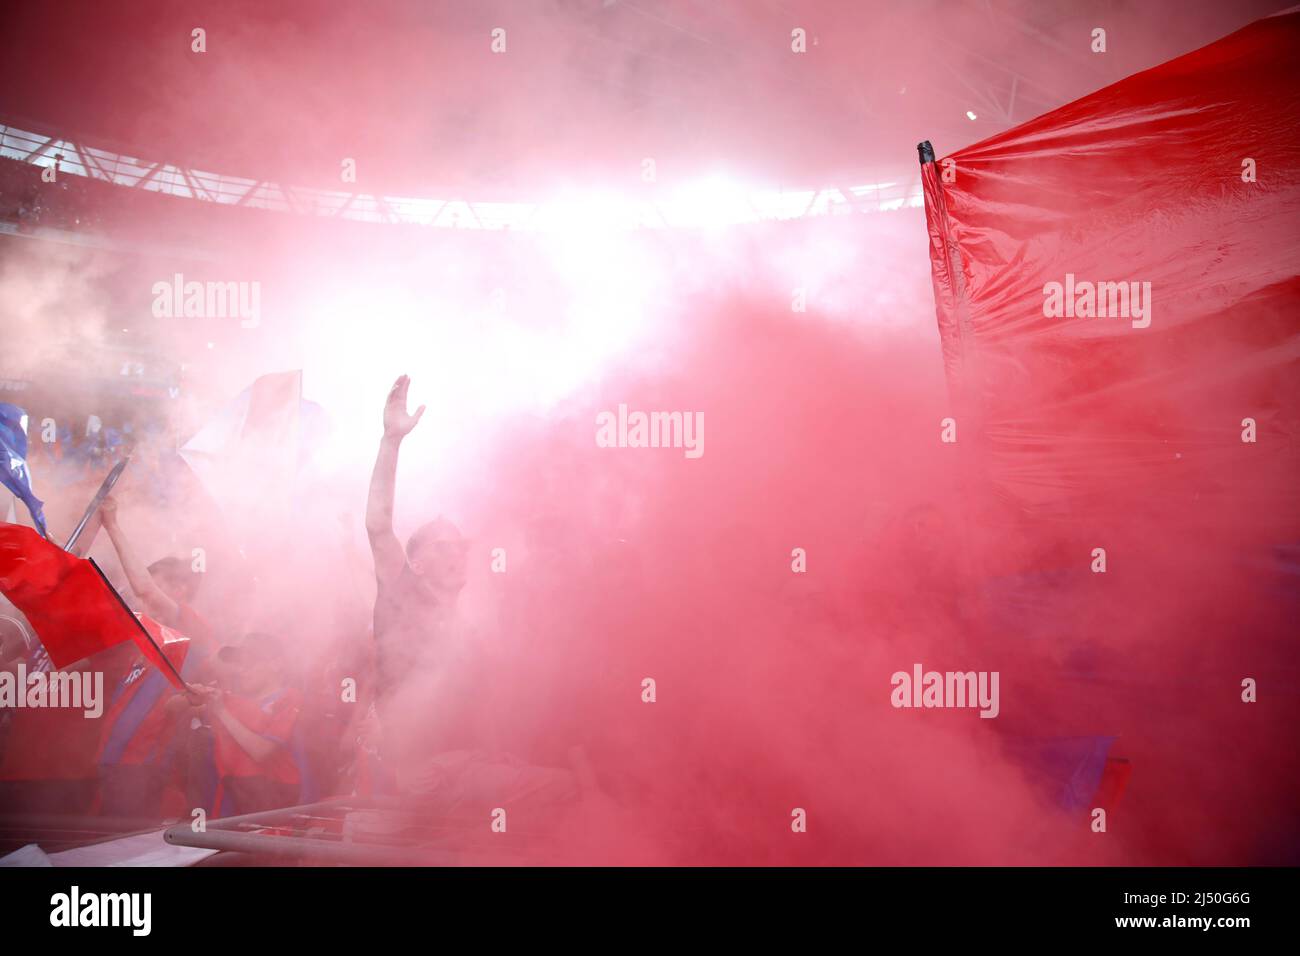 London, UK. 17th Apr, 2022. Palace fans after a red flare was set off at the Emirates FA Cup Semi-Final of Chelsea v Crystal Palace at Wembley Stadium, London, UK on 17th April 2022. Credit: Paul Marriott/Alamy Live News Stock Photo